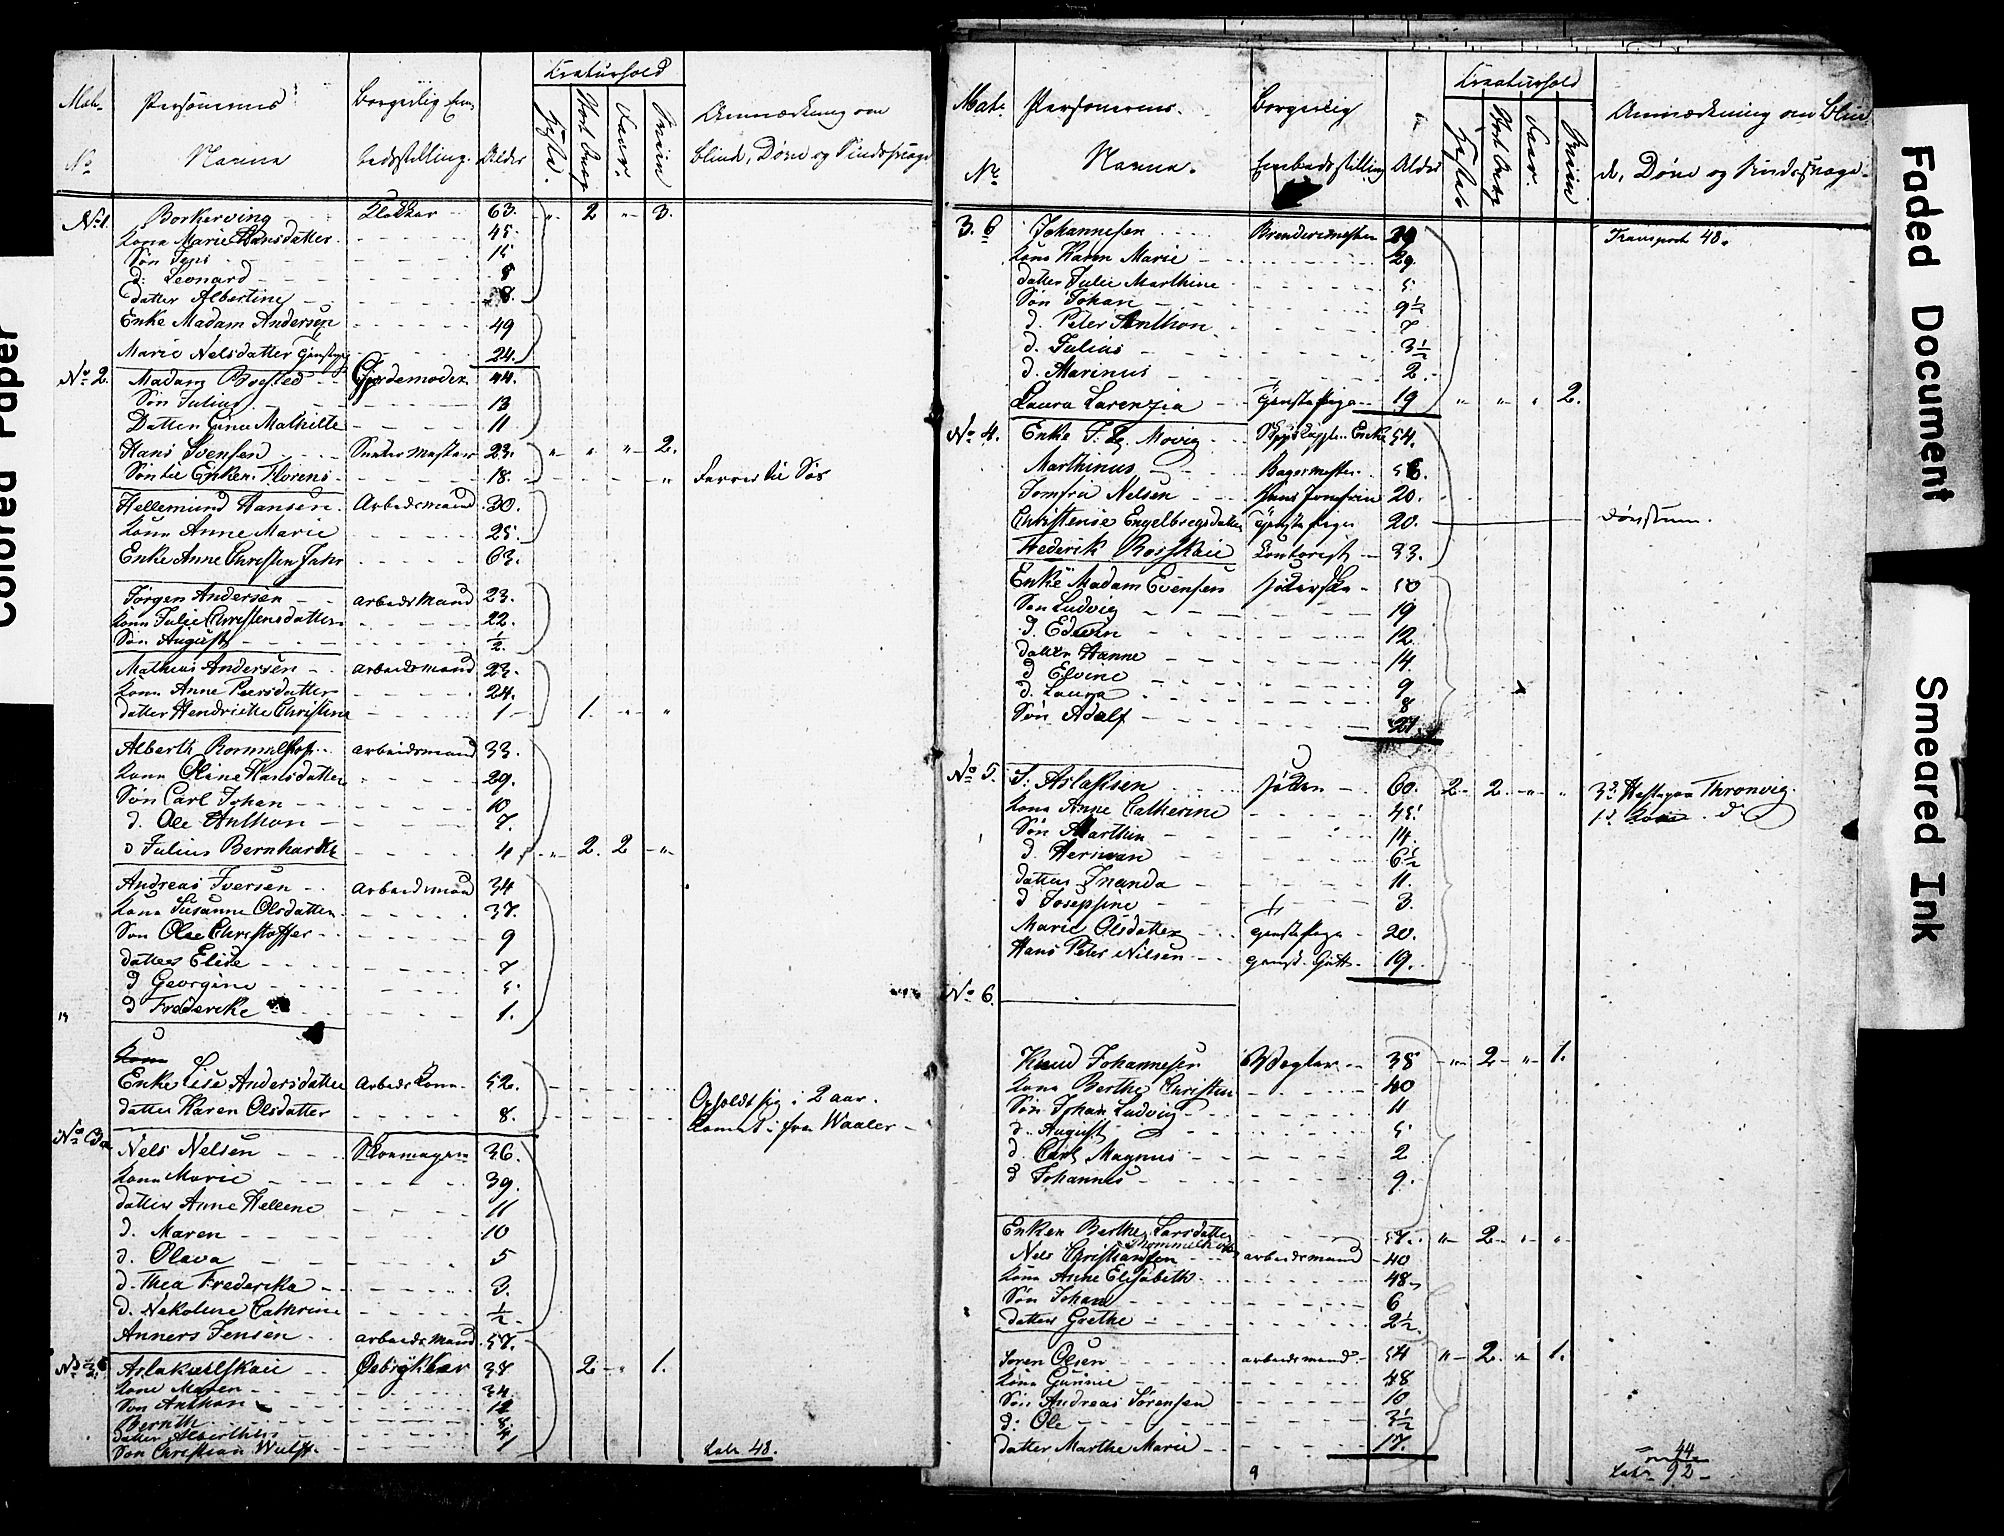 , Census 1845 for Moss/Moss, 1845, p. 3